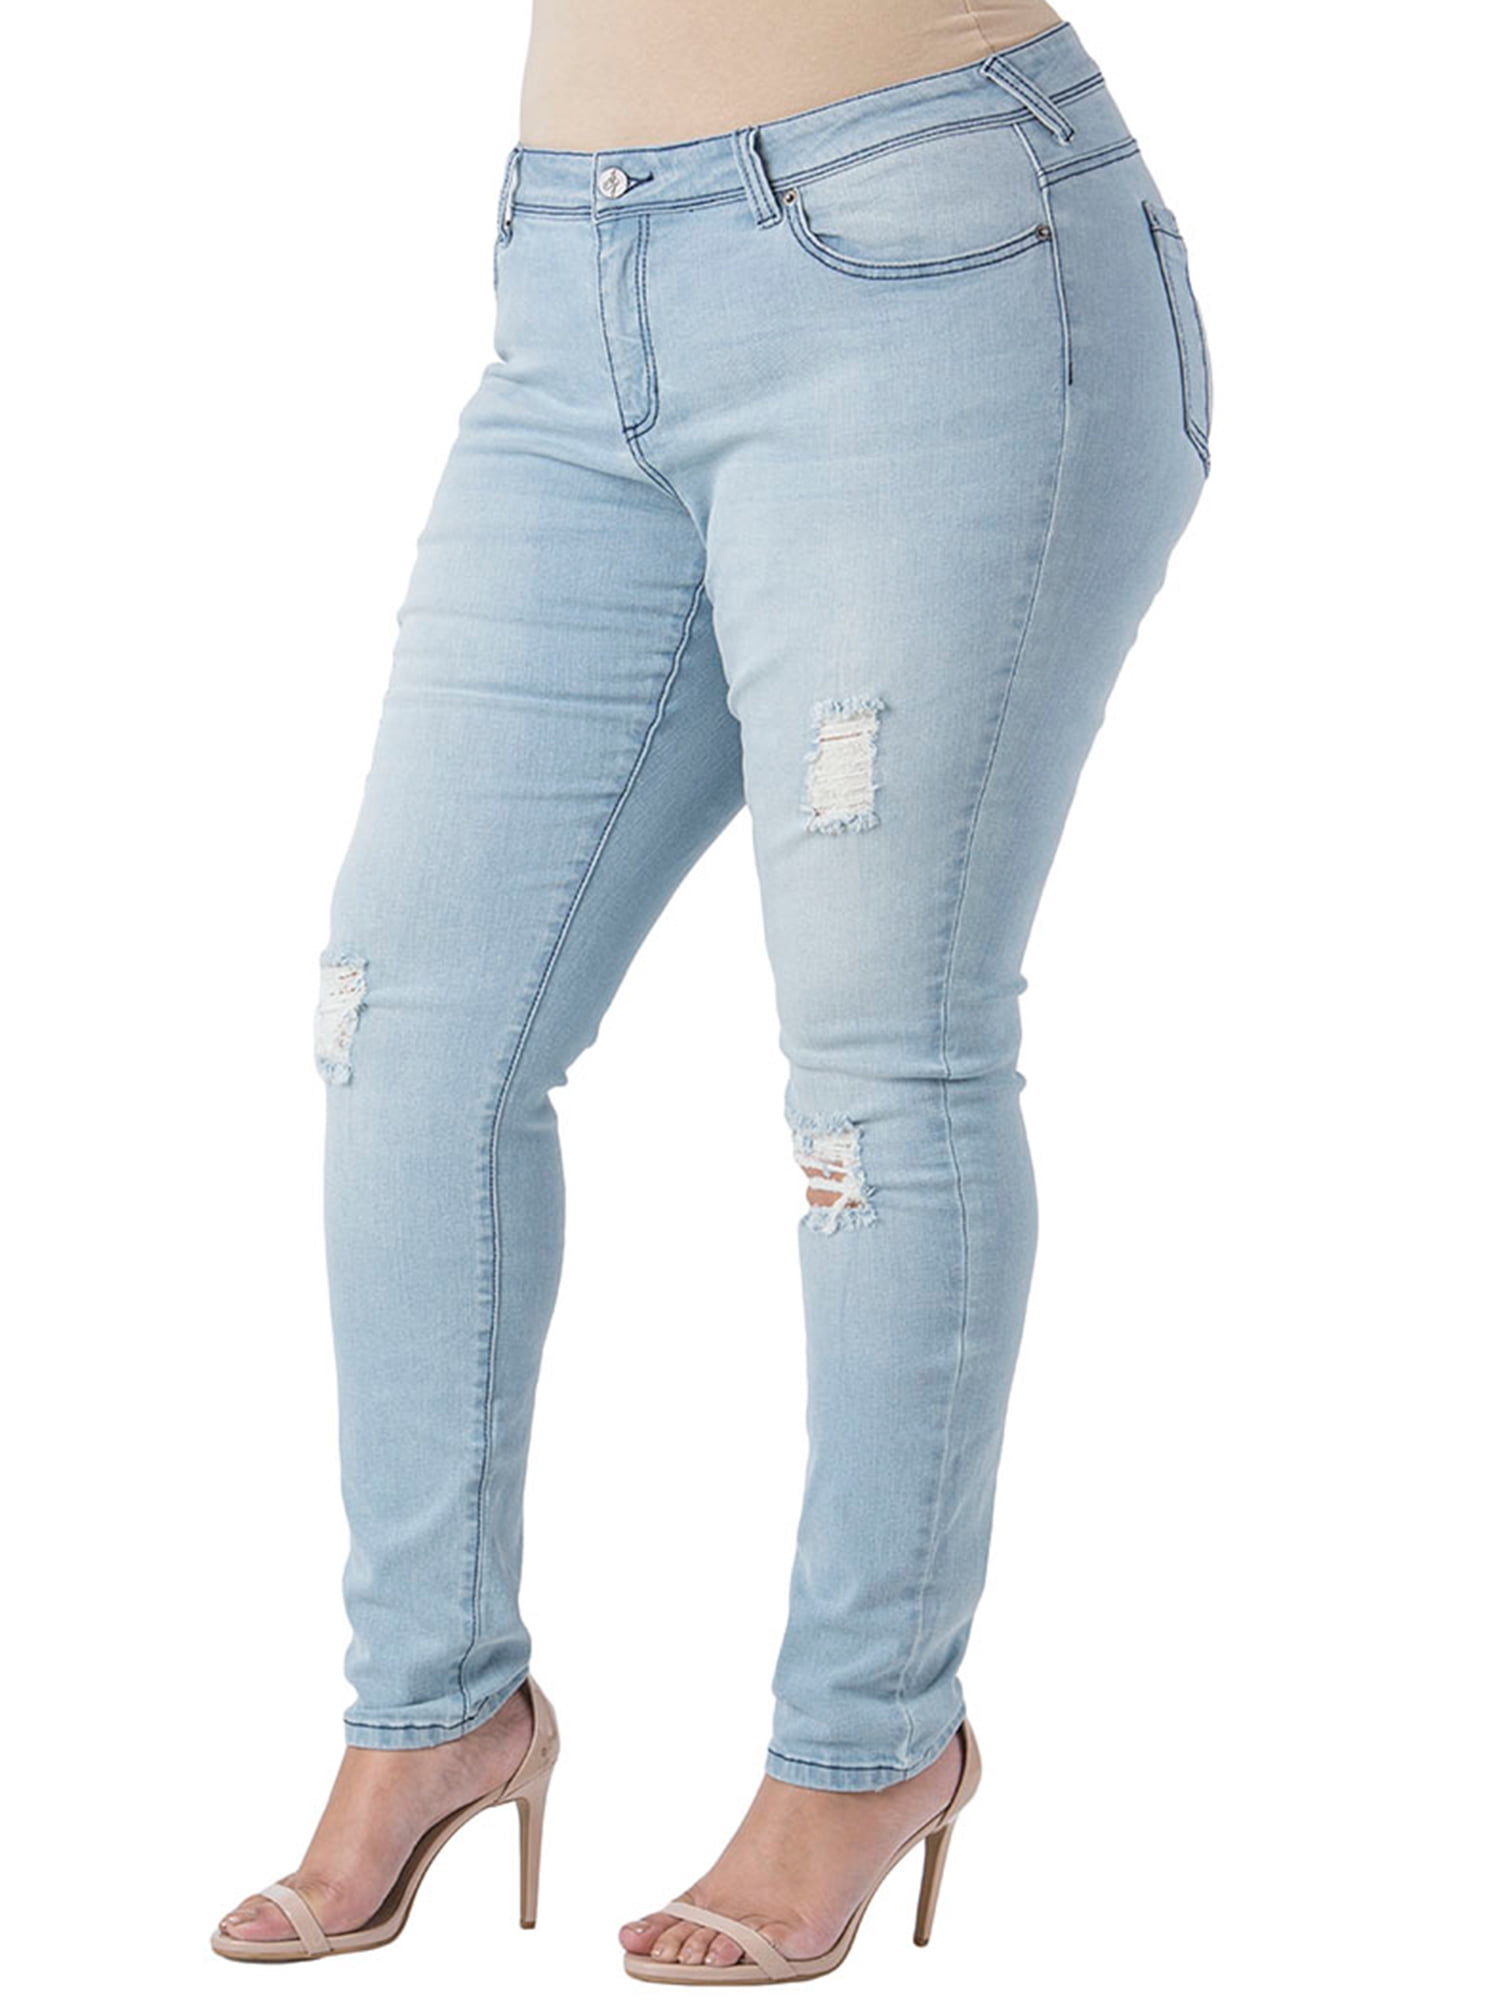 justice high waisted jeans